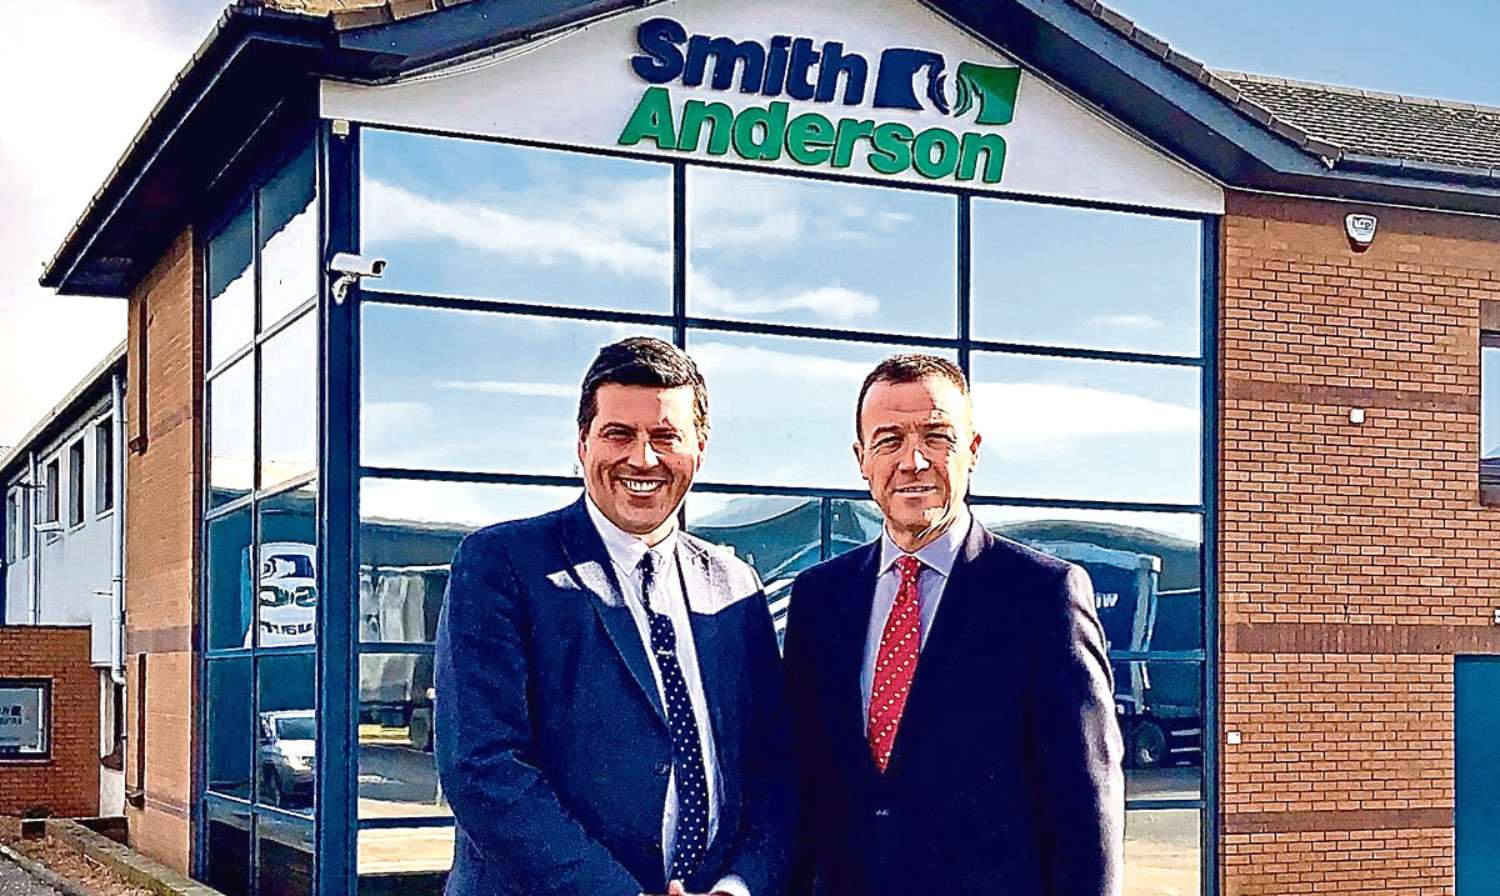 Business Minister Jamie Hepburn with Michael Longstaffe, Chief Executive Officer of Smith Anderson